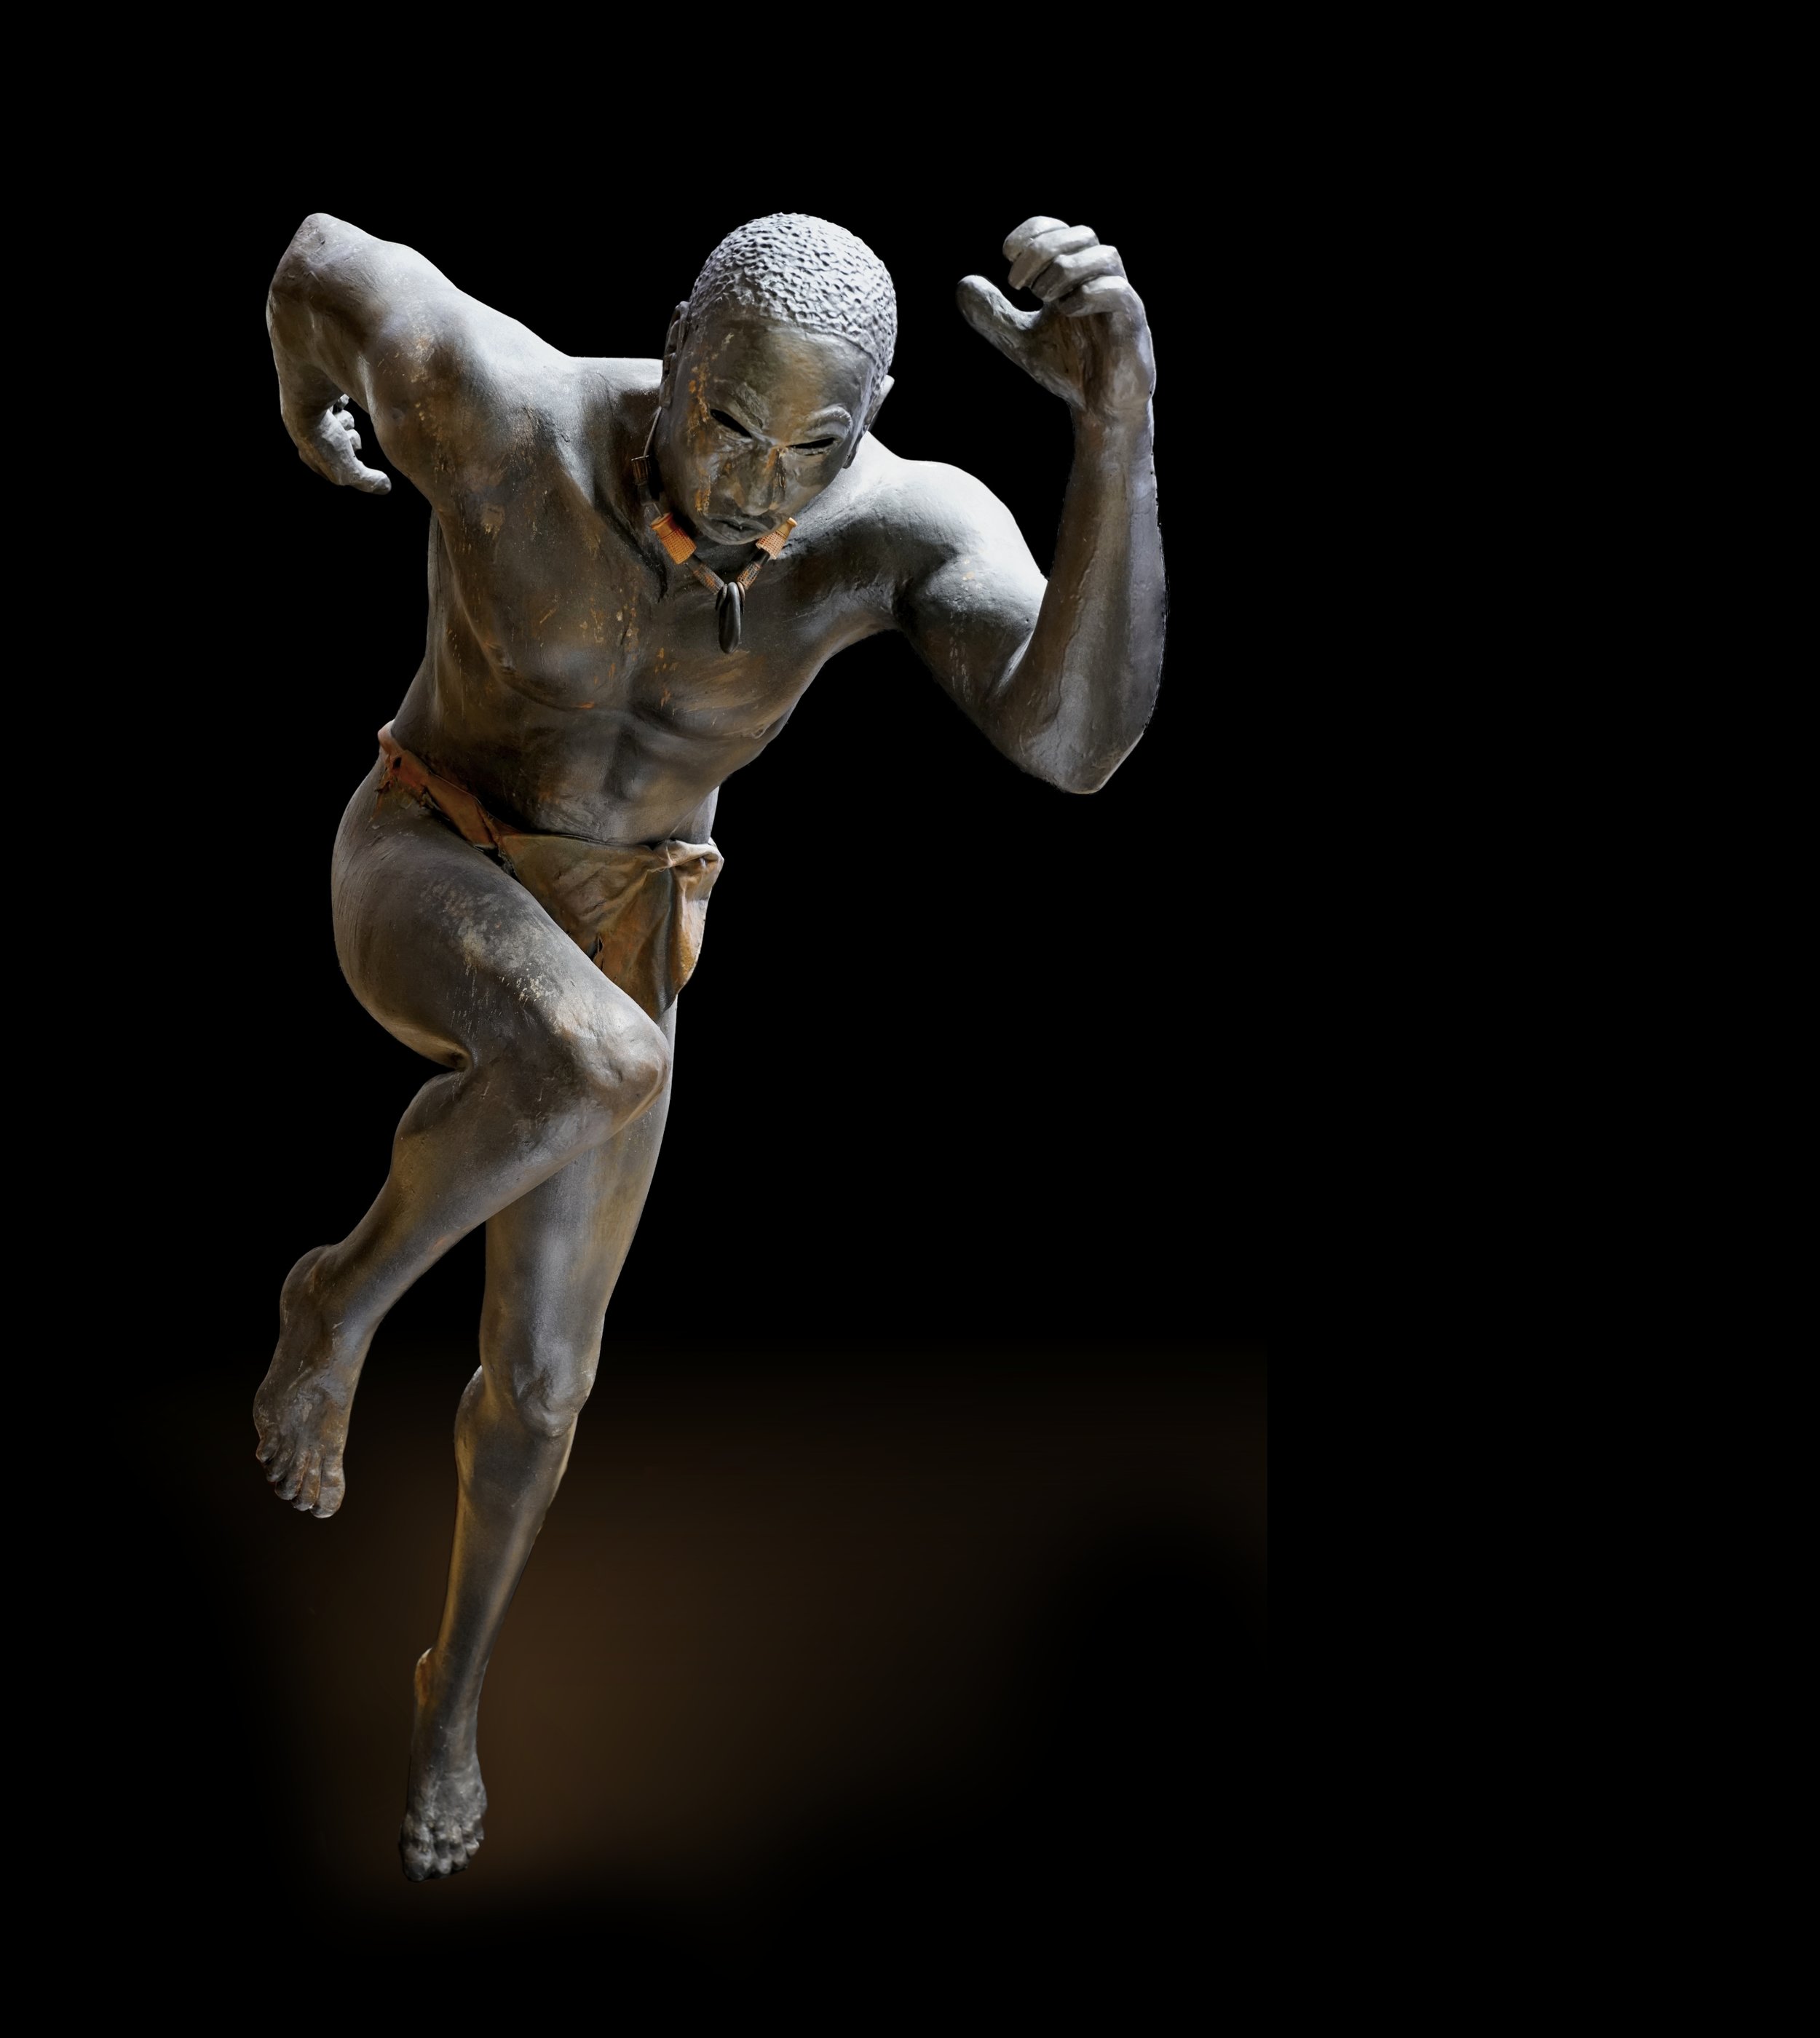 sculpture of African man running, by Aaron Paskins